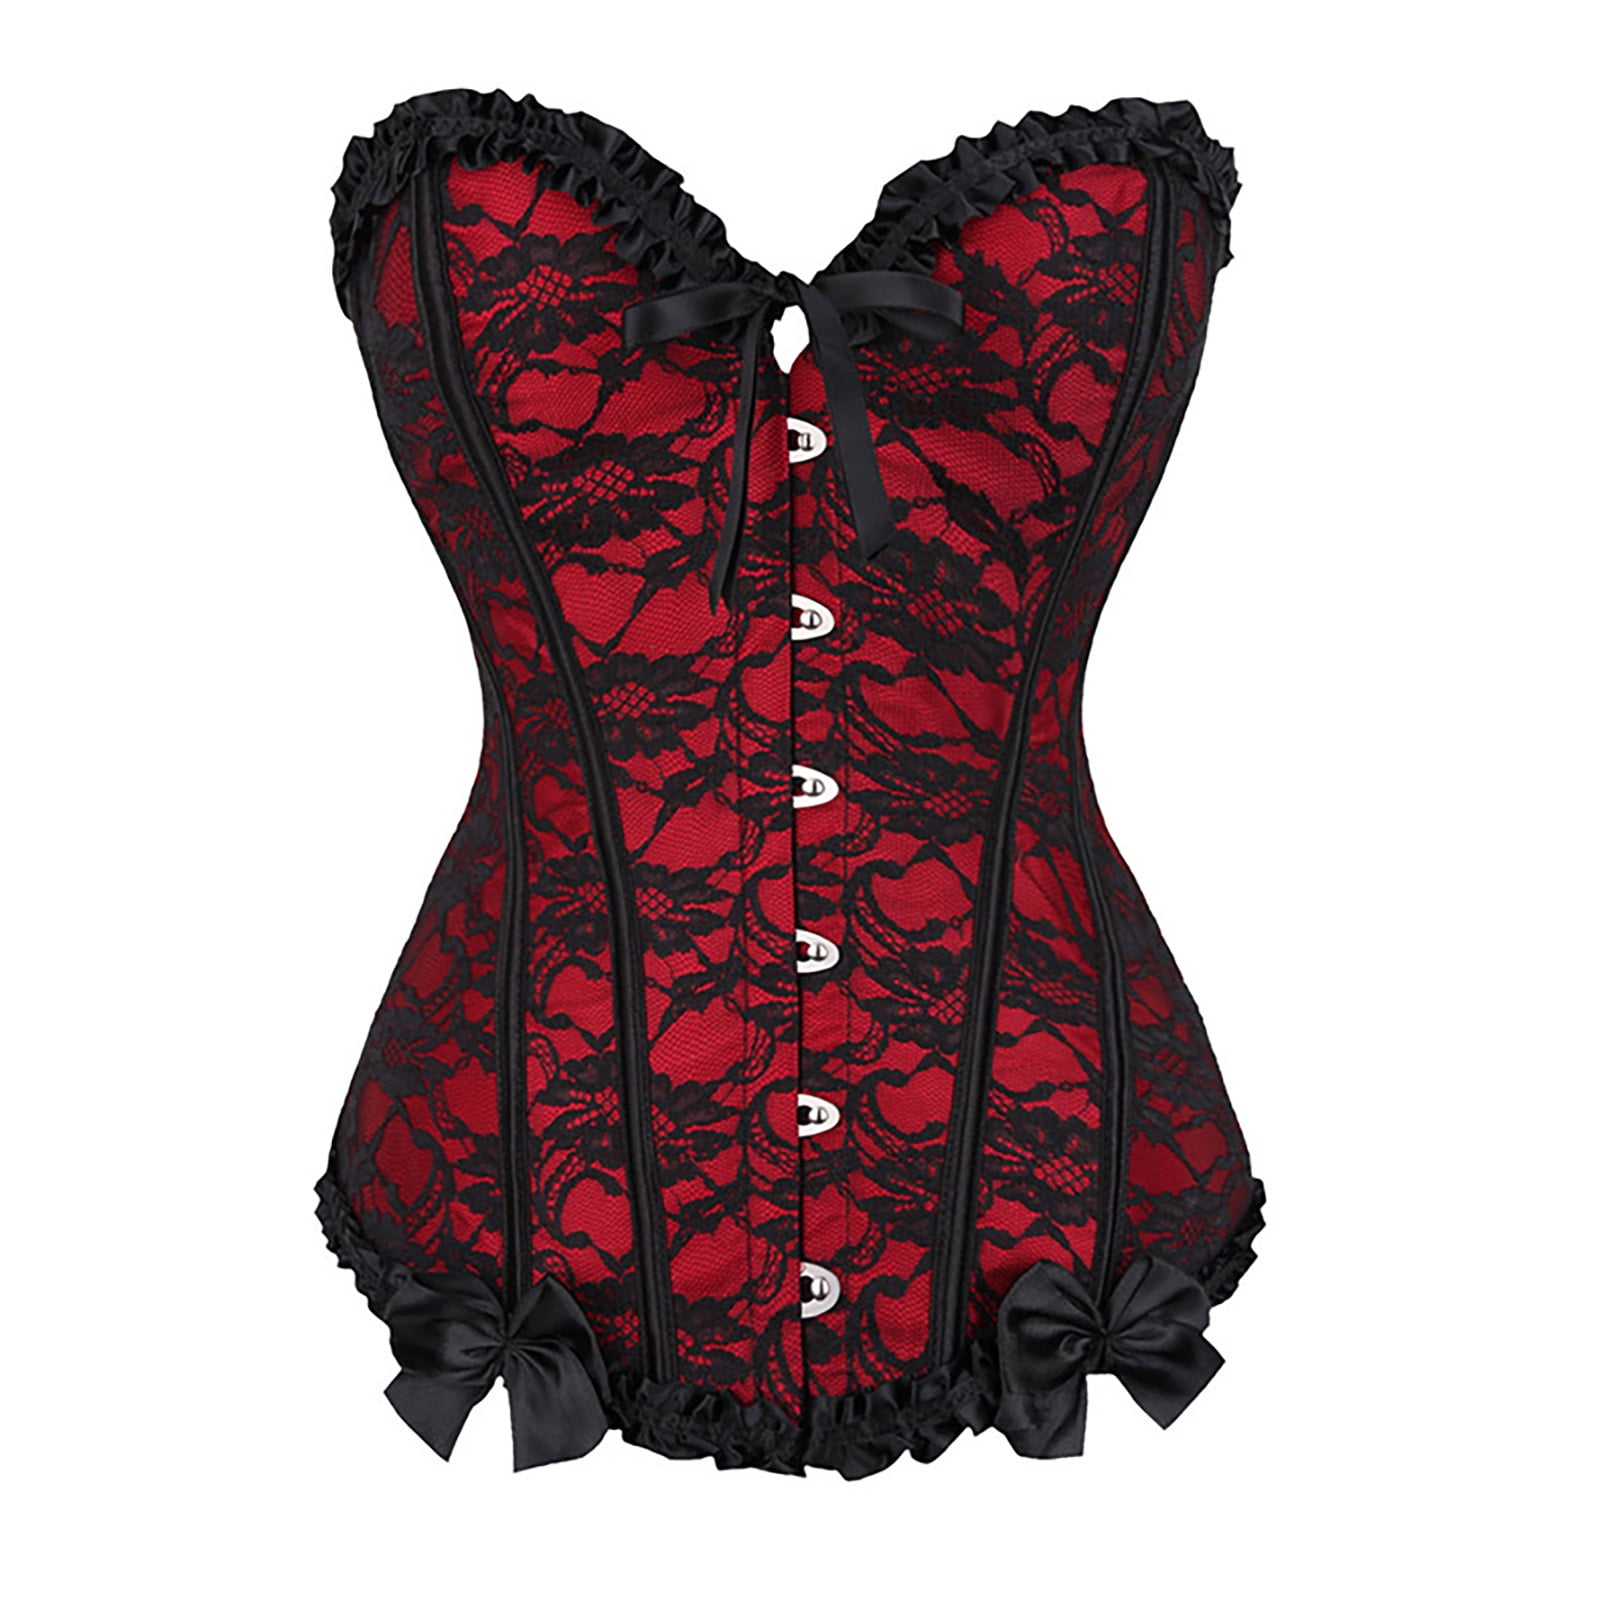 Women Lace Corset Push Up BodyShaping Overbust Corset Bustier with